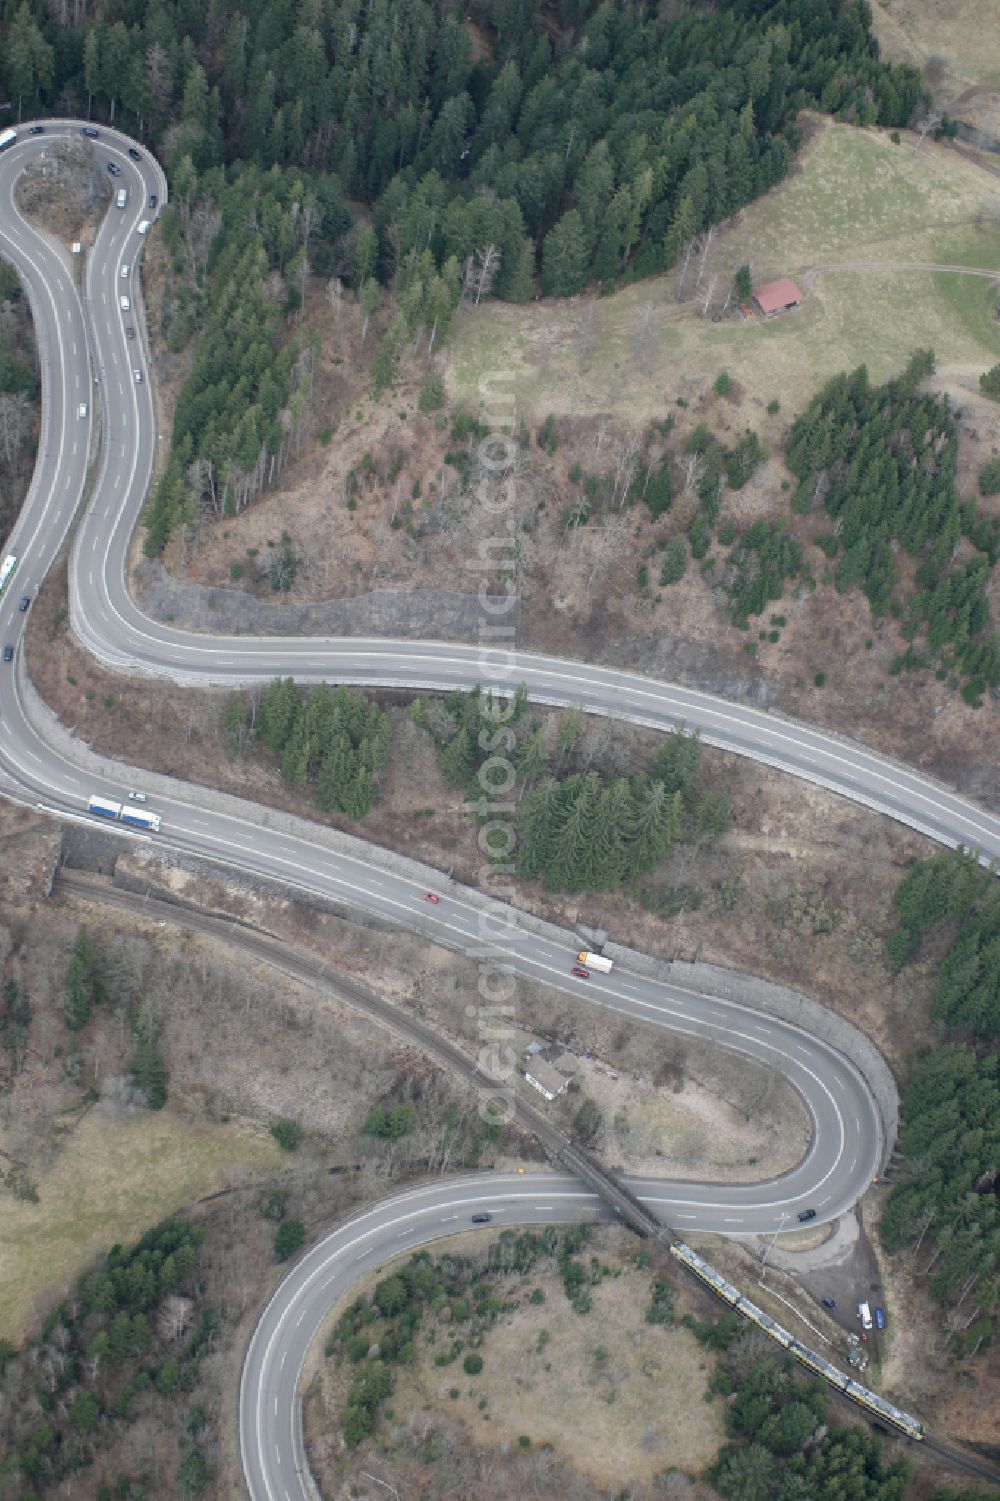 Höllsteig from above - Serpentine-shaped curve of a road guide B31 Hoellental in Hoellsteig in the state Baden-Wuerttemberg, Germany